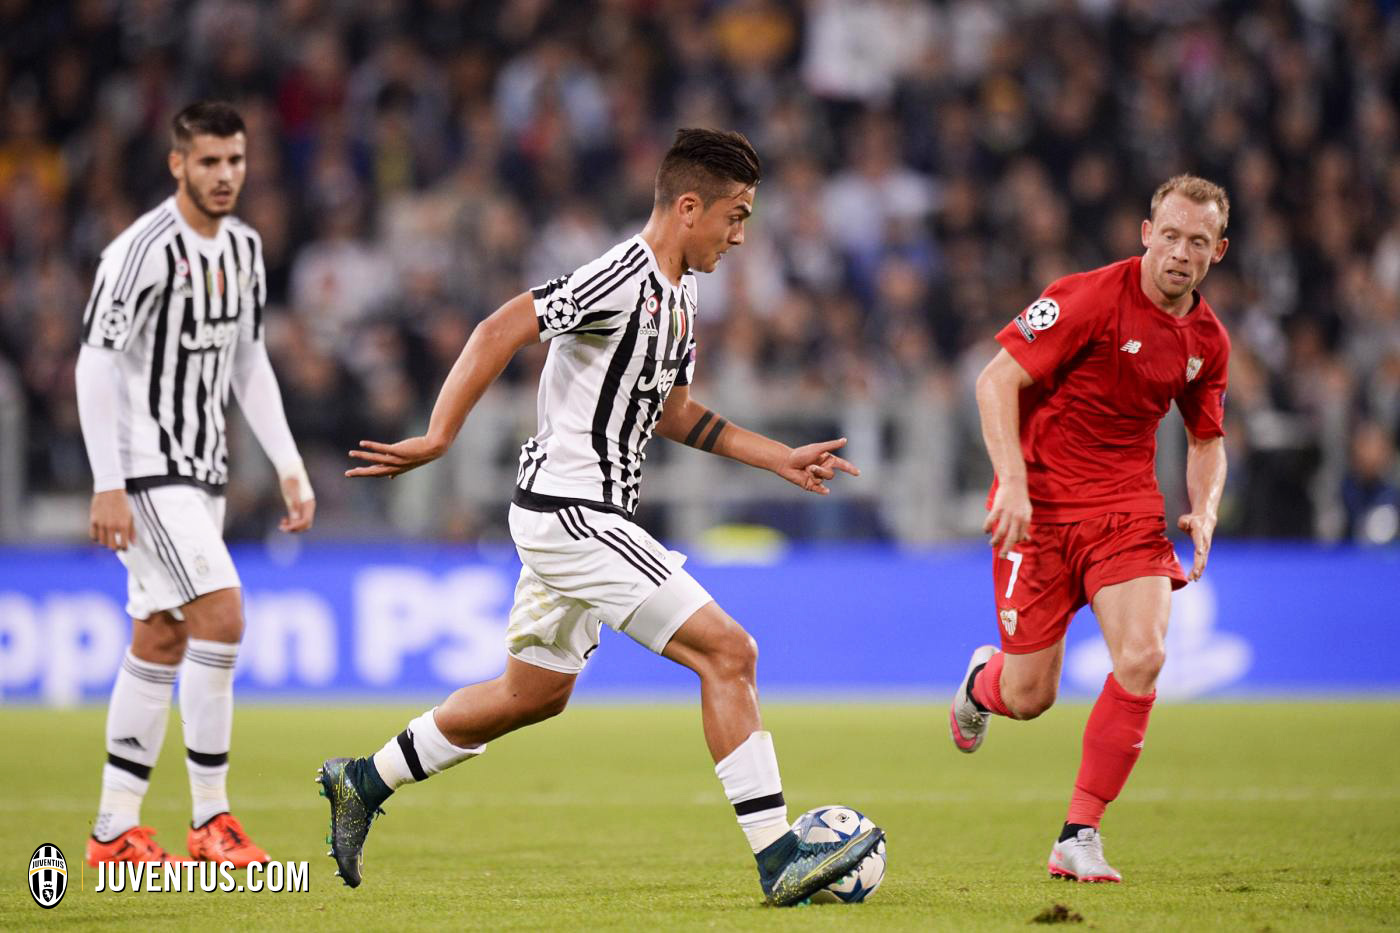 Can Juve kick start their campaign after a tough start against Sevilla?